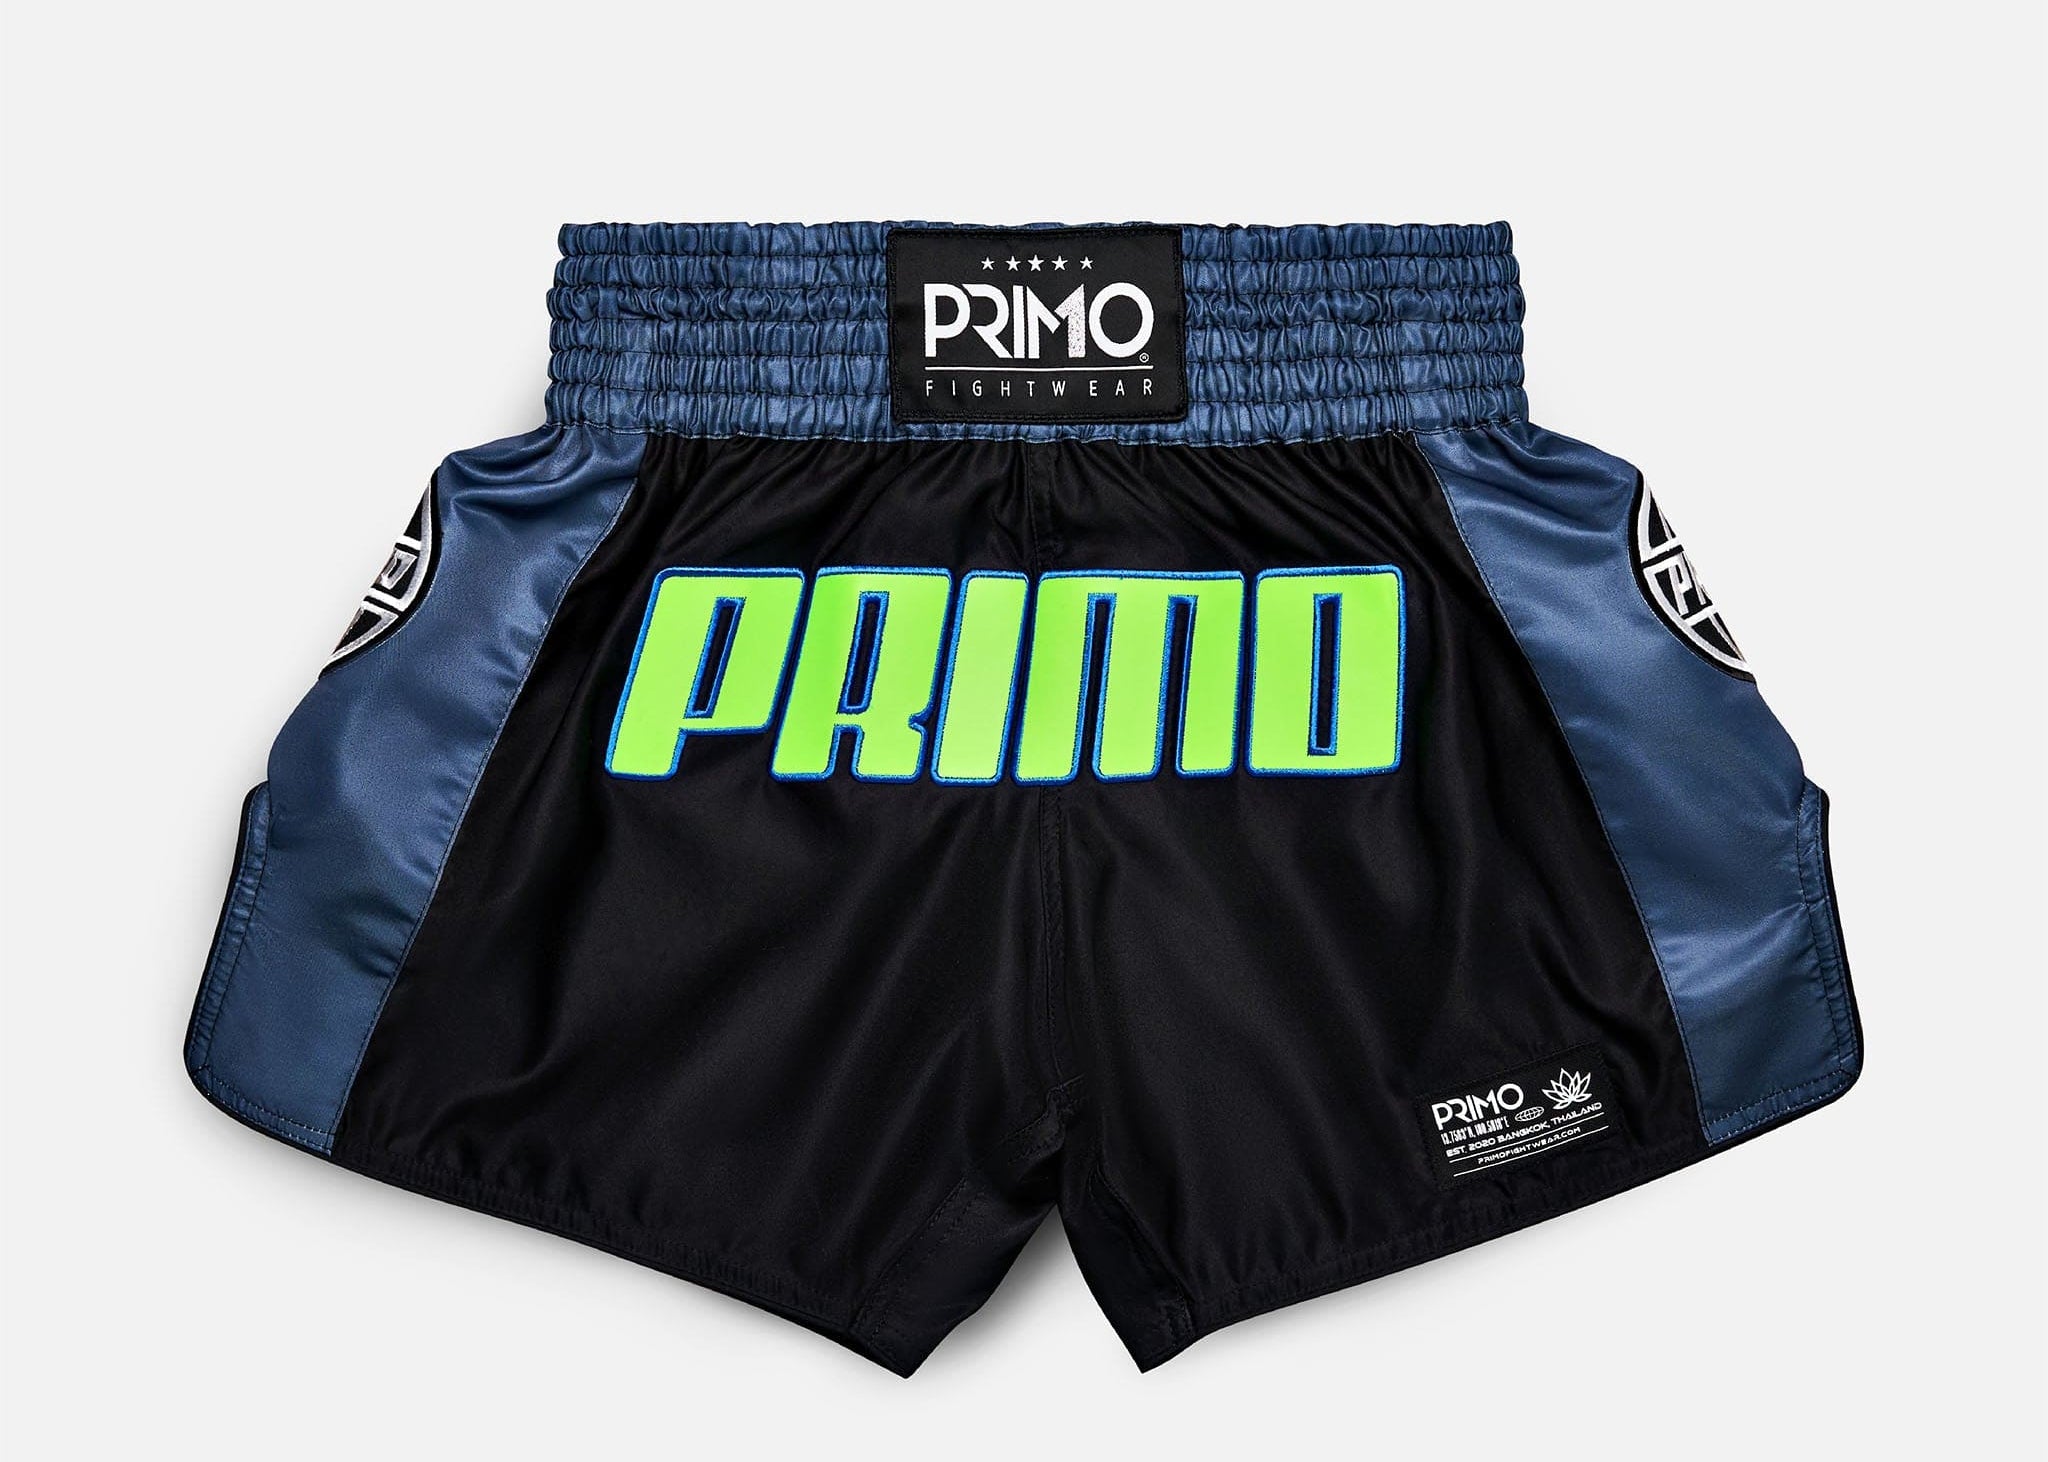 Primo Fight Wear Official Muay Thai Shorts - Trinity Series - Black